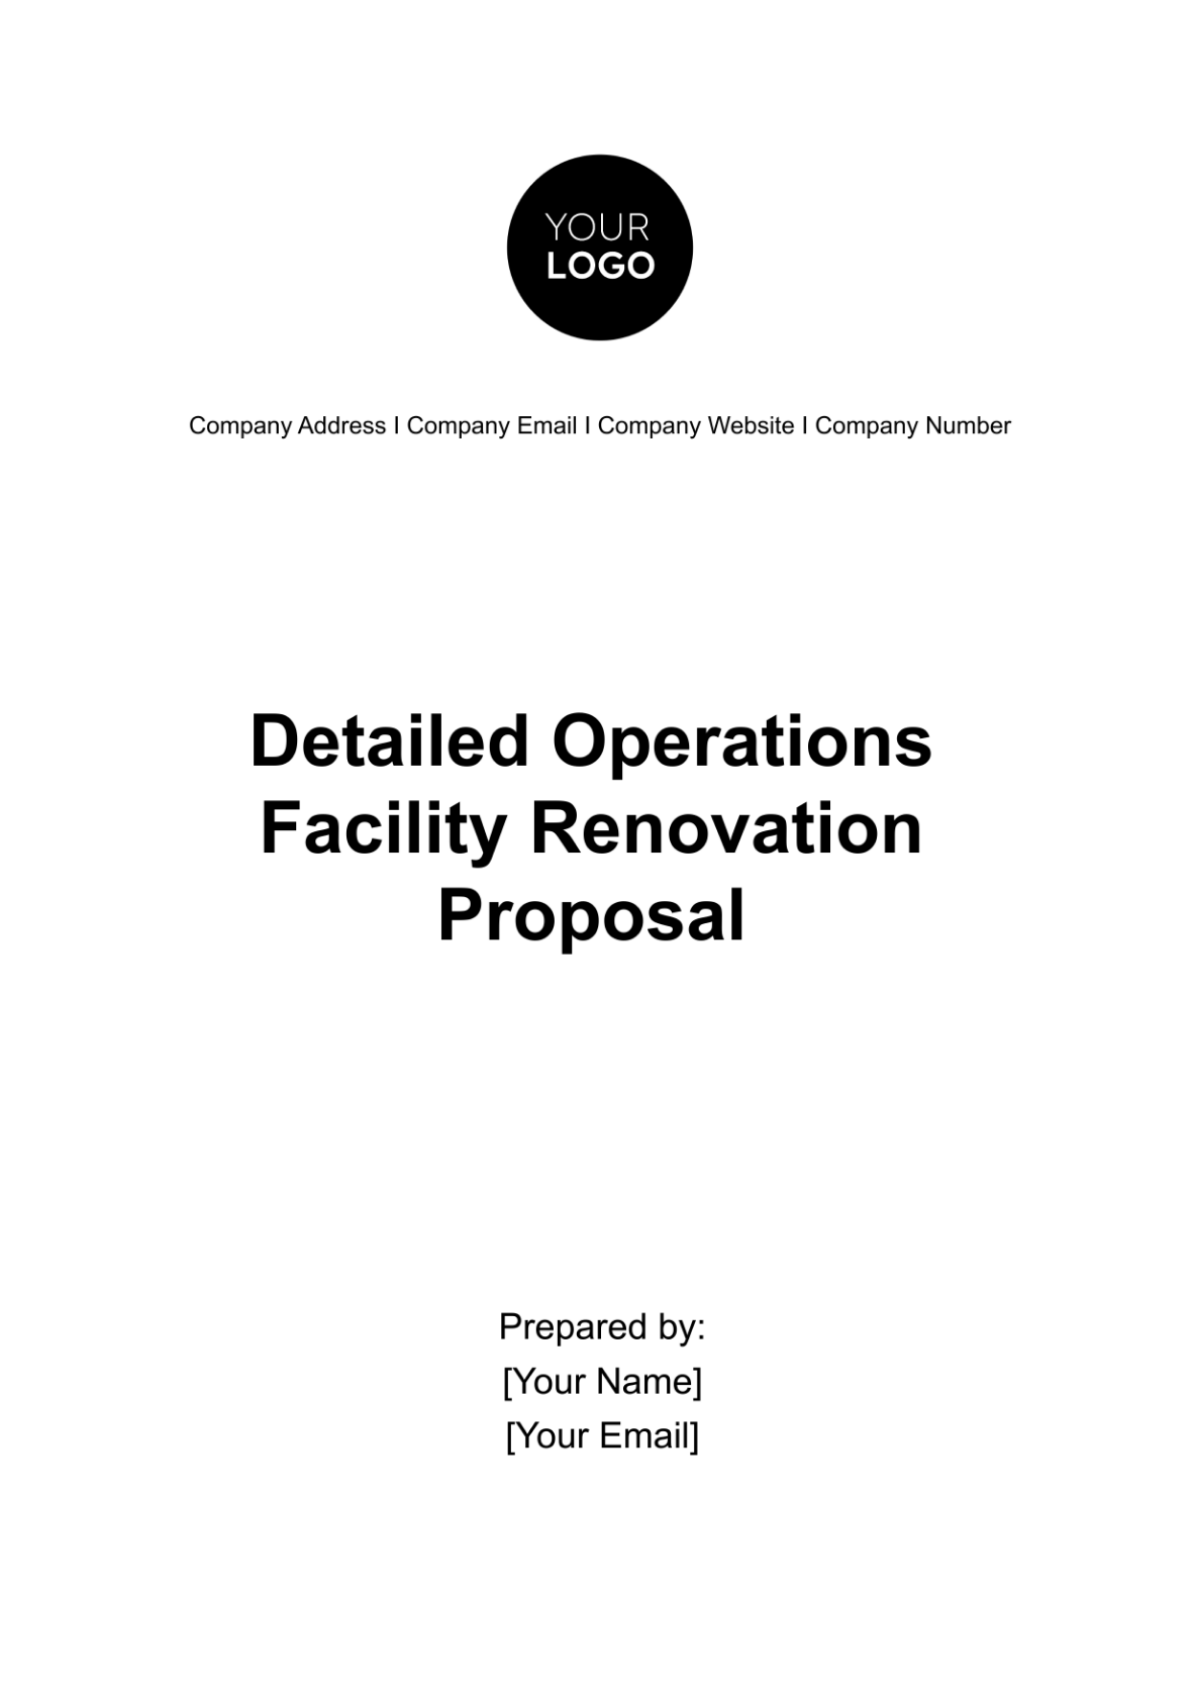 Detailed Operations Facility Renovation Proposal Template